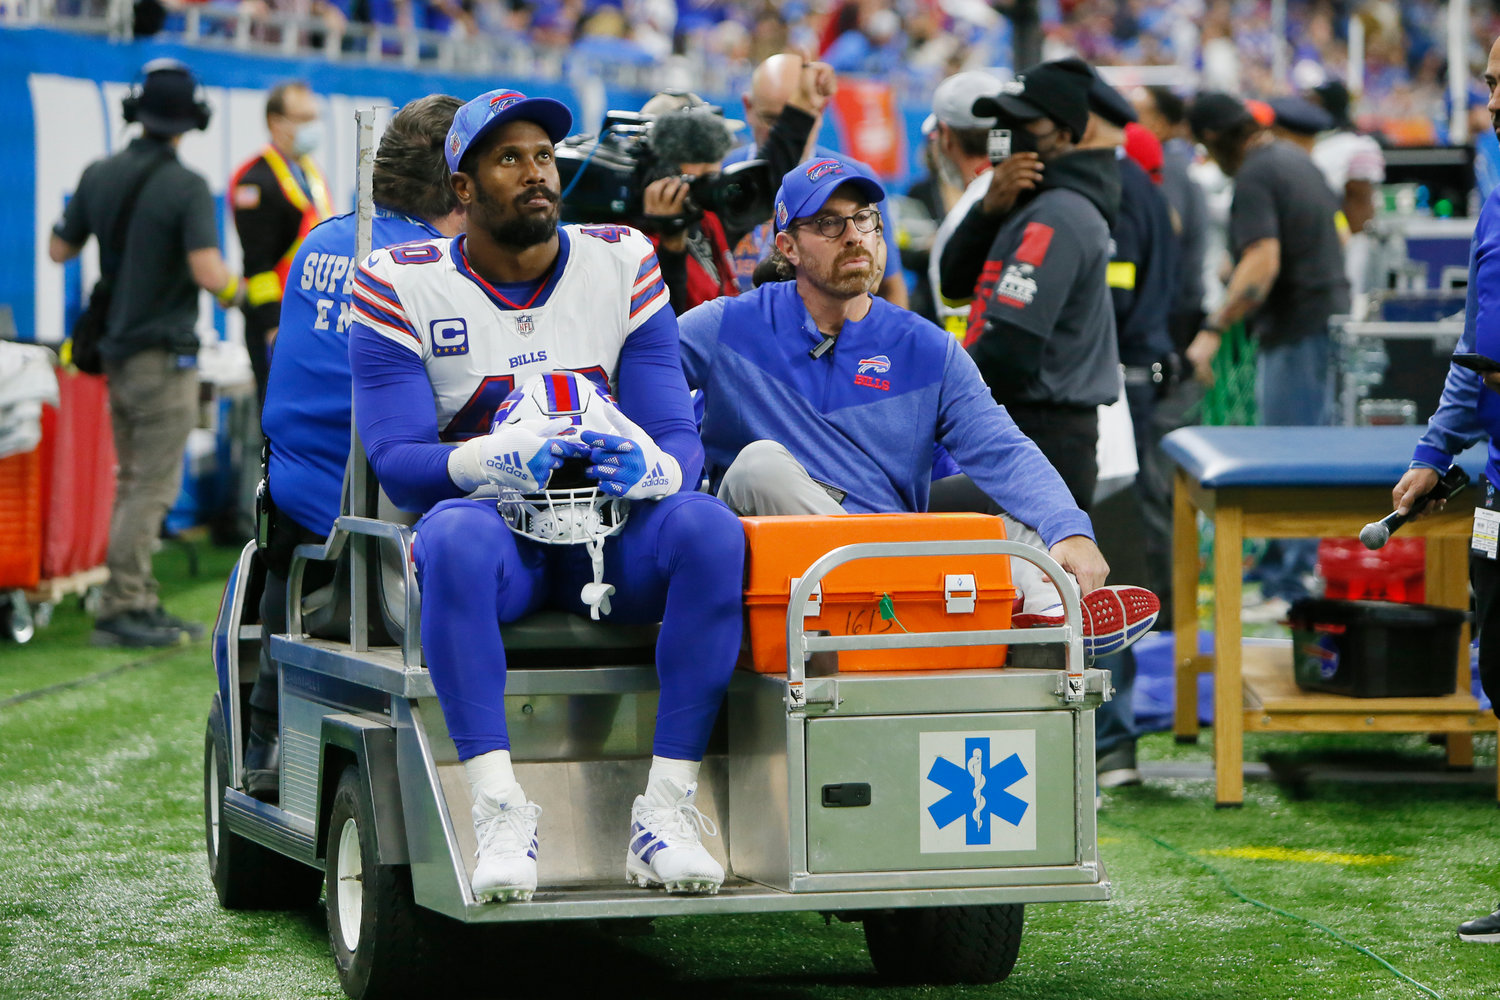 Buffalo Bills linebacker Von Miller is carted off the field during the first half against the Detroit Lions on Thursday afternoon in Detroit.